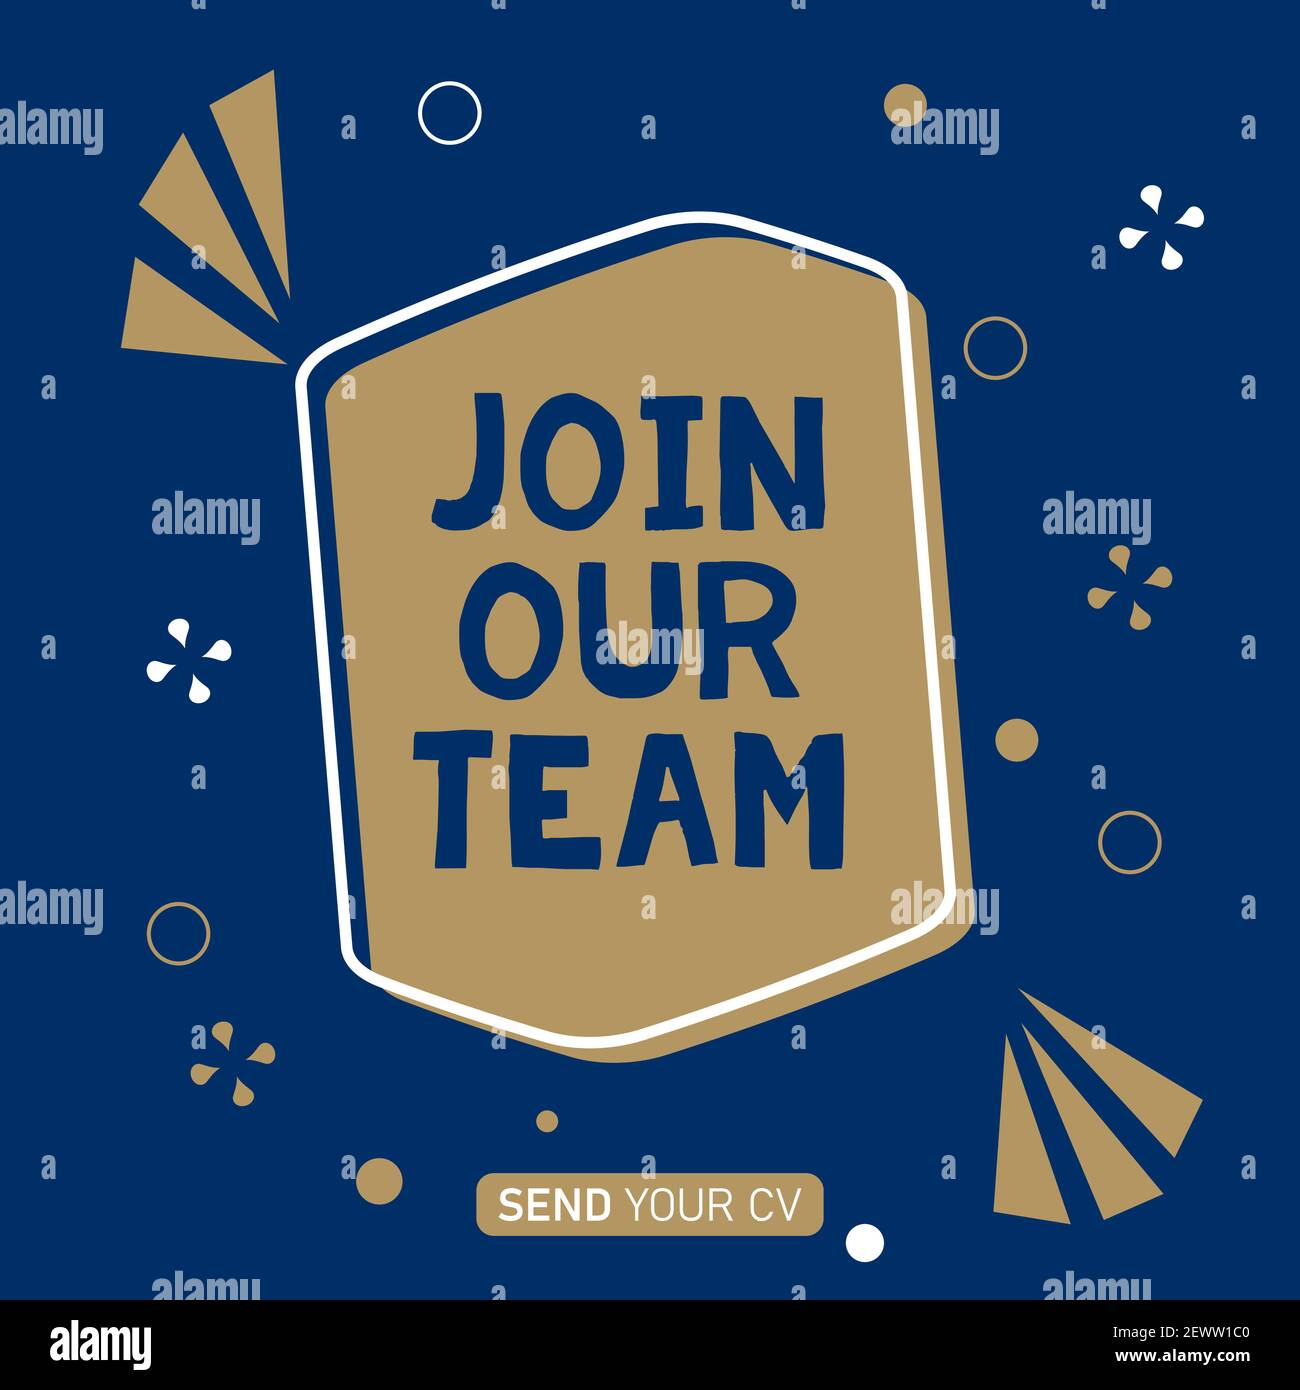 Join Our Team Banner Vector Template Illustration Design. Vector EPS 10. Stock Vector